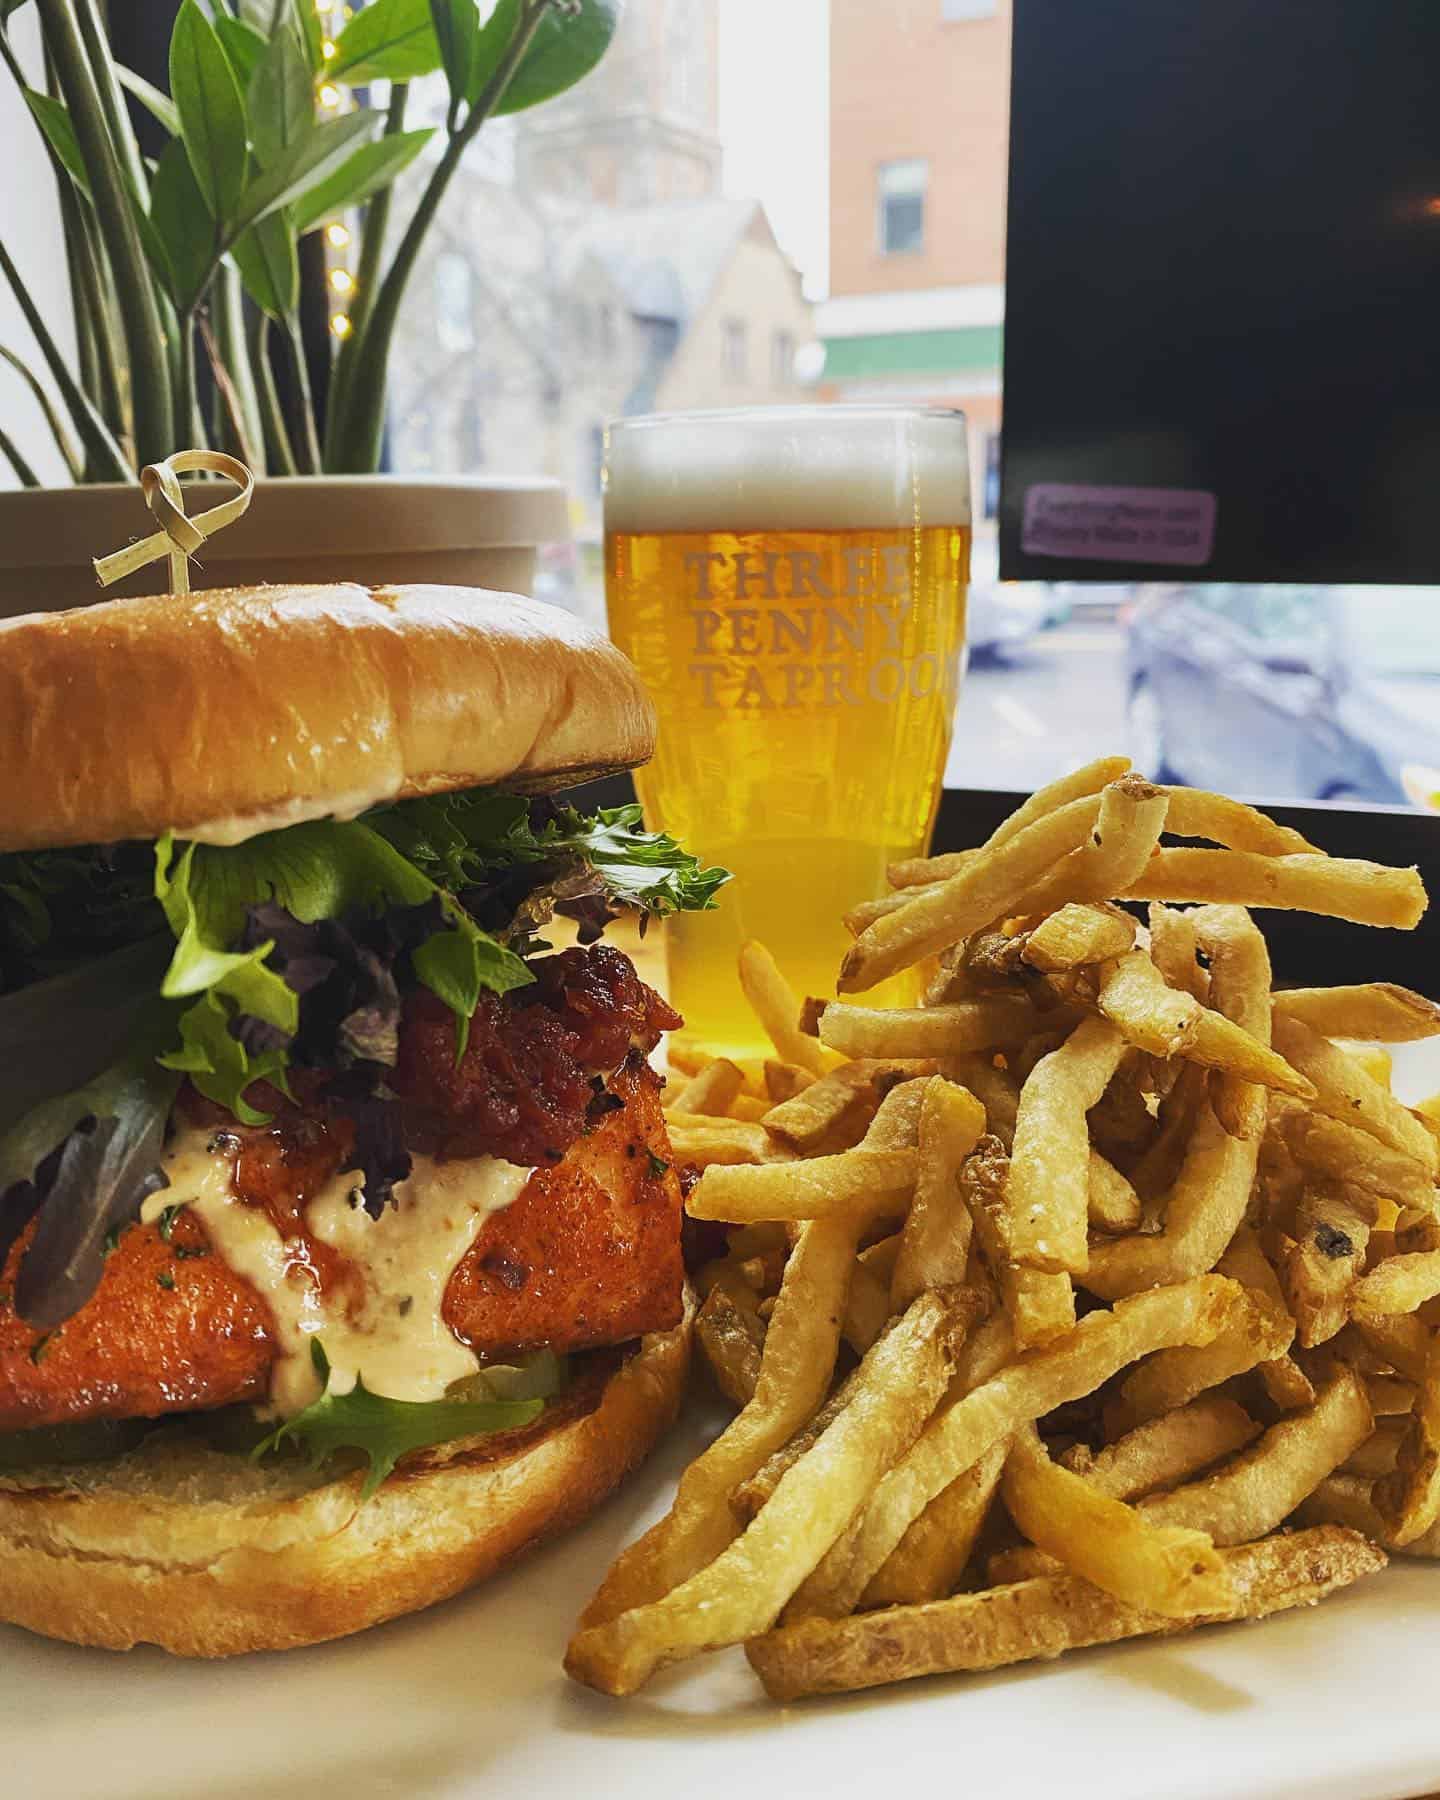 Three Penny Taproom - Blackened Salmon Sandwich with Fries and Beer